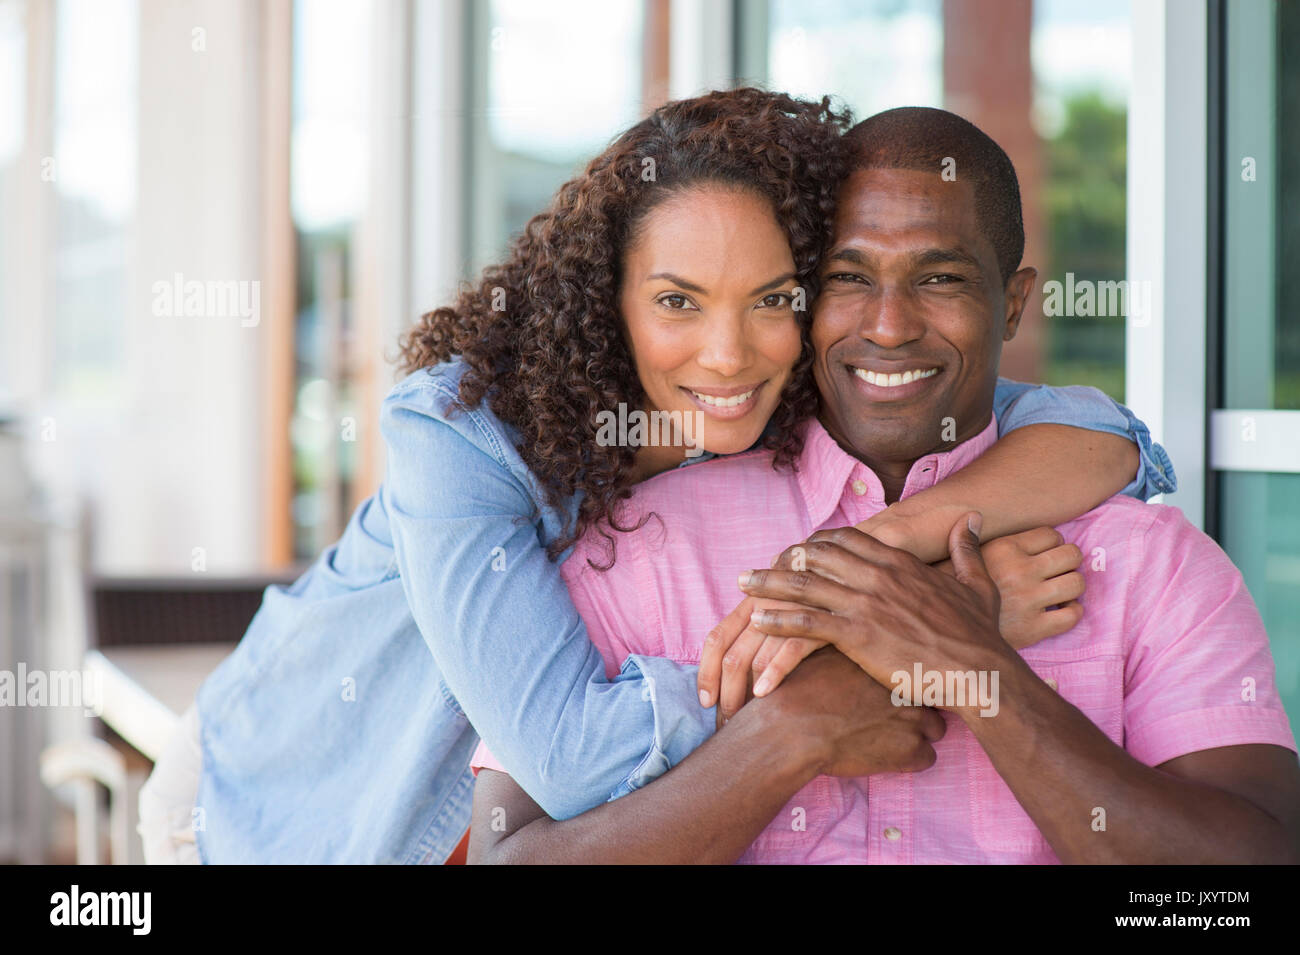 Portrait of smiling couple hugging Stock Photo